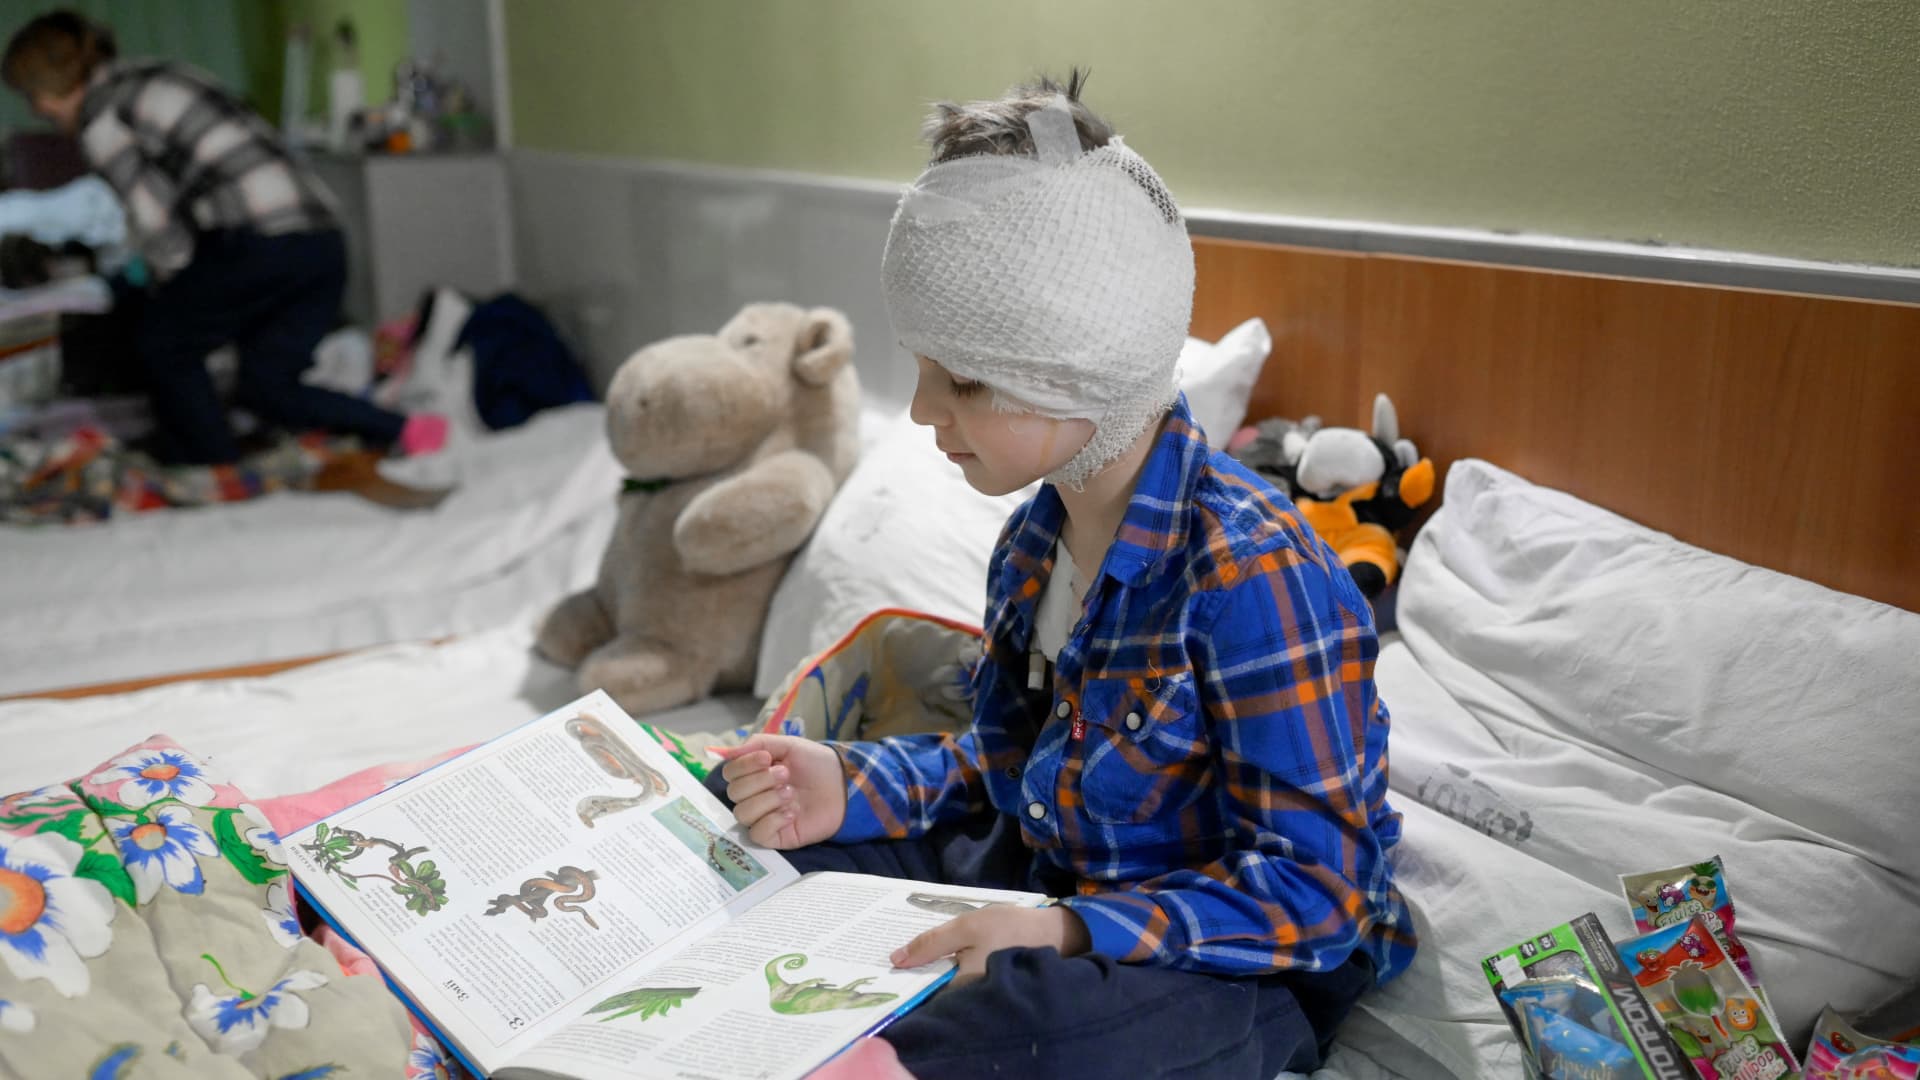 Misha, 5, who lost his mother some weeks ago and got injured during a Russian strike, reads a book during his time in a basement at a hospital on March 26, 2022, in Mykolaiv.